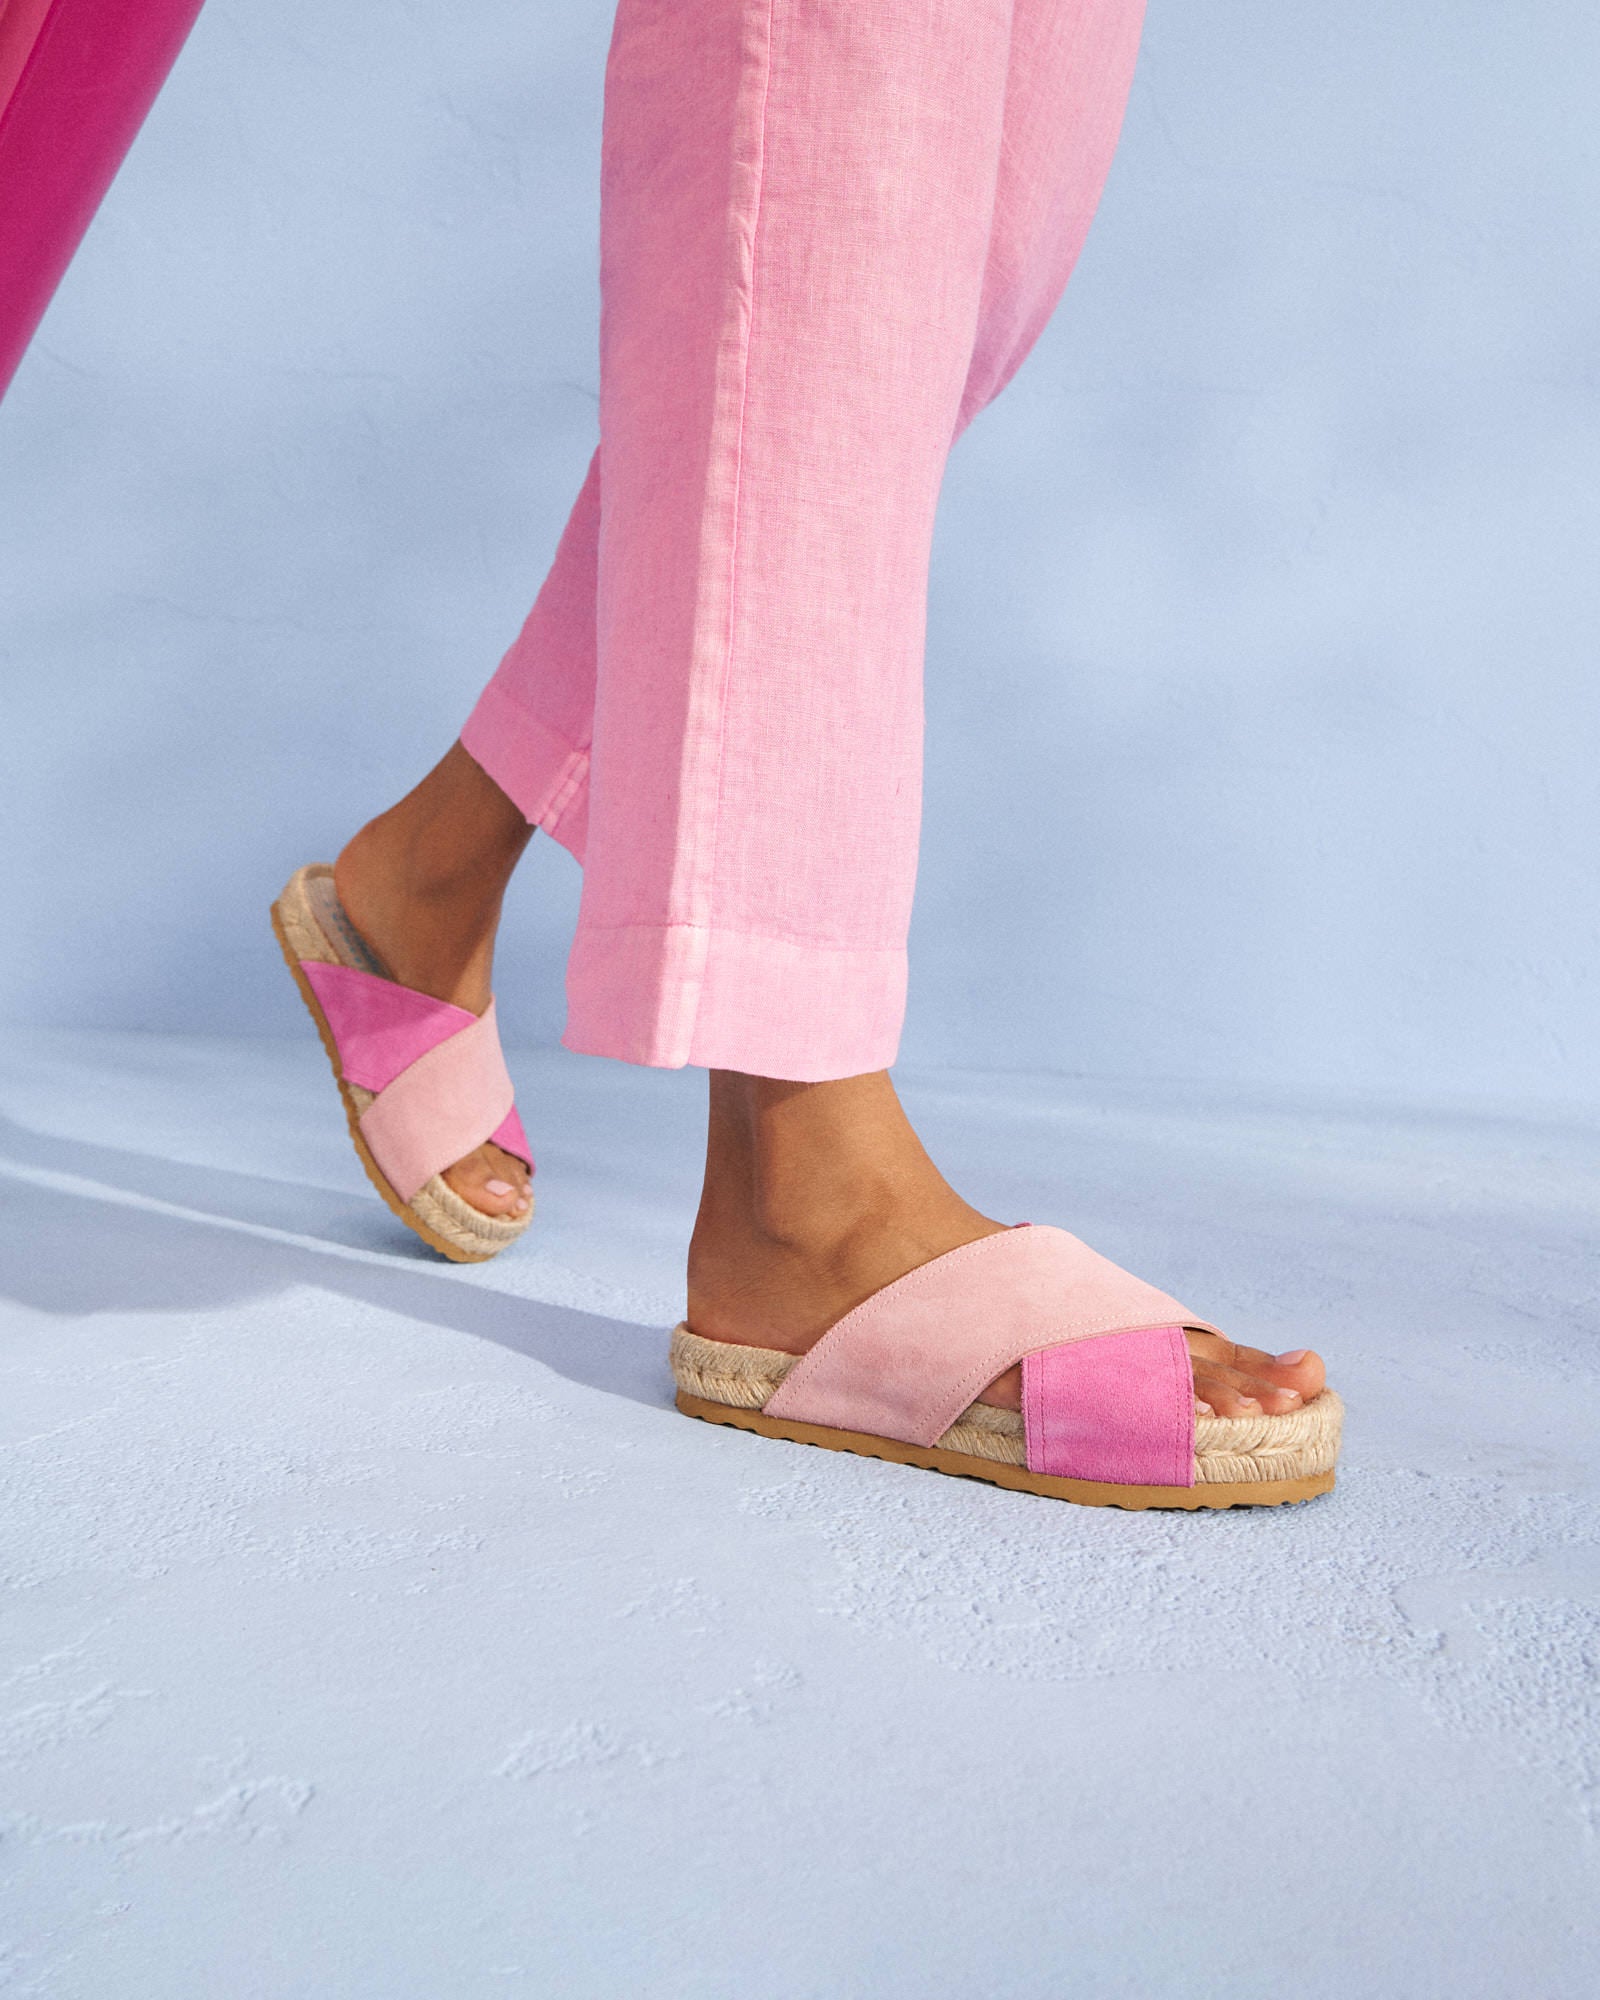 Suede Crossed Bands Sandals - Wide Bands - Blush and Bold Pink